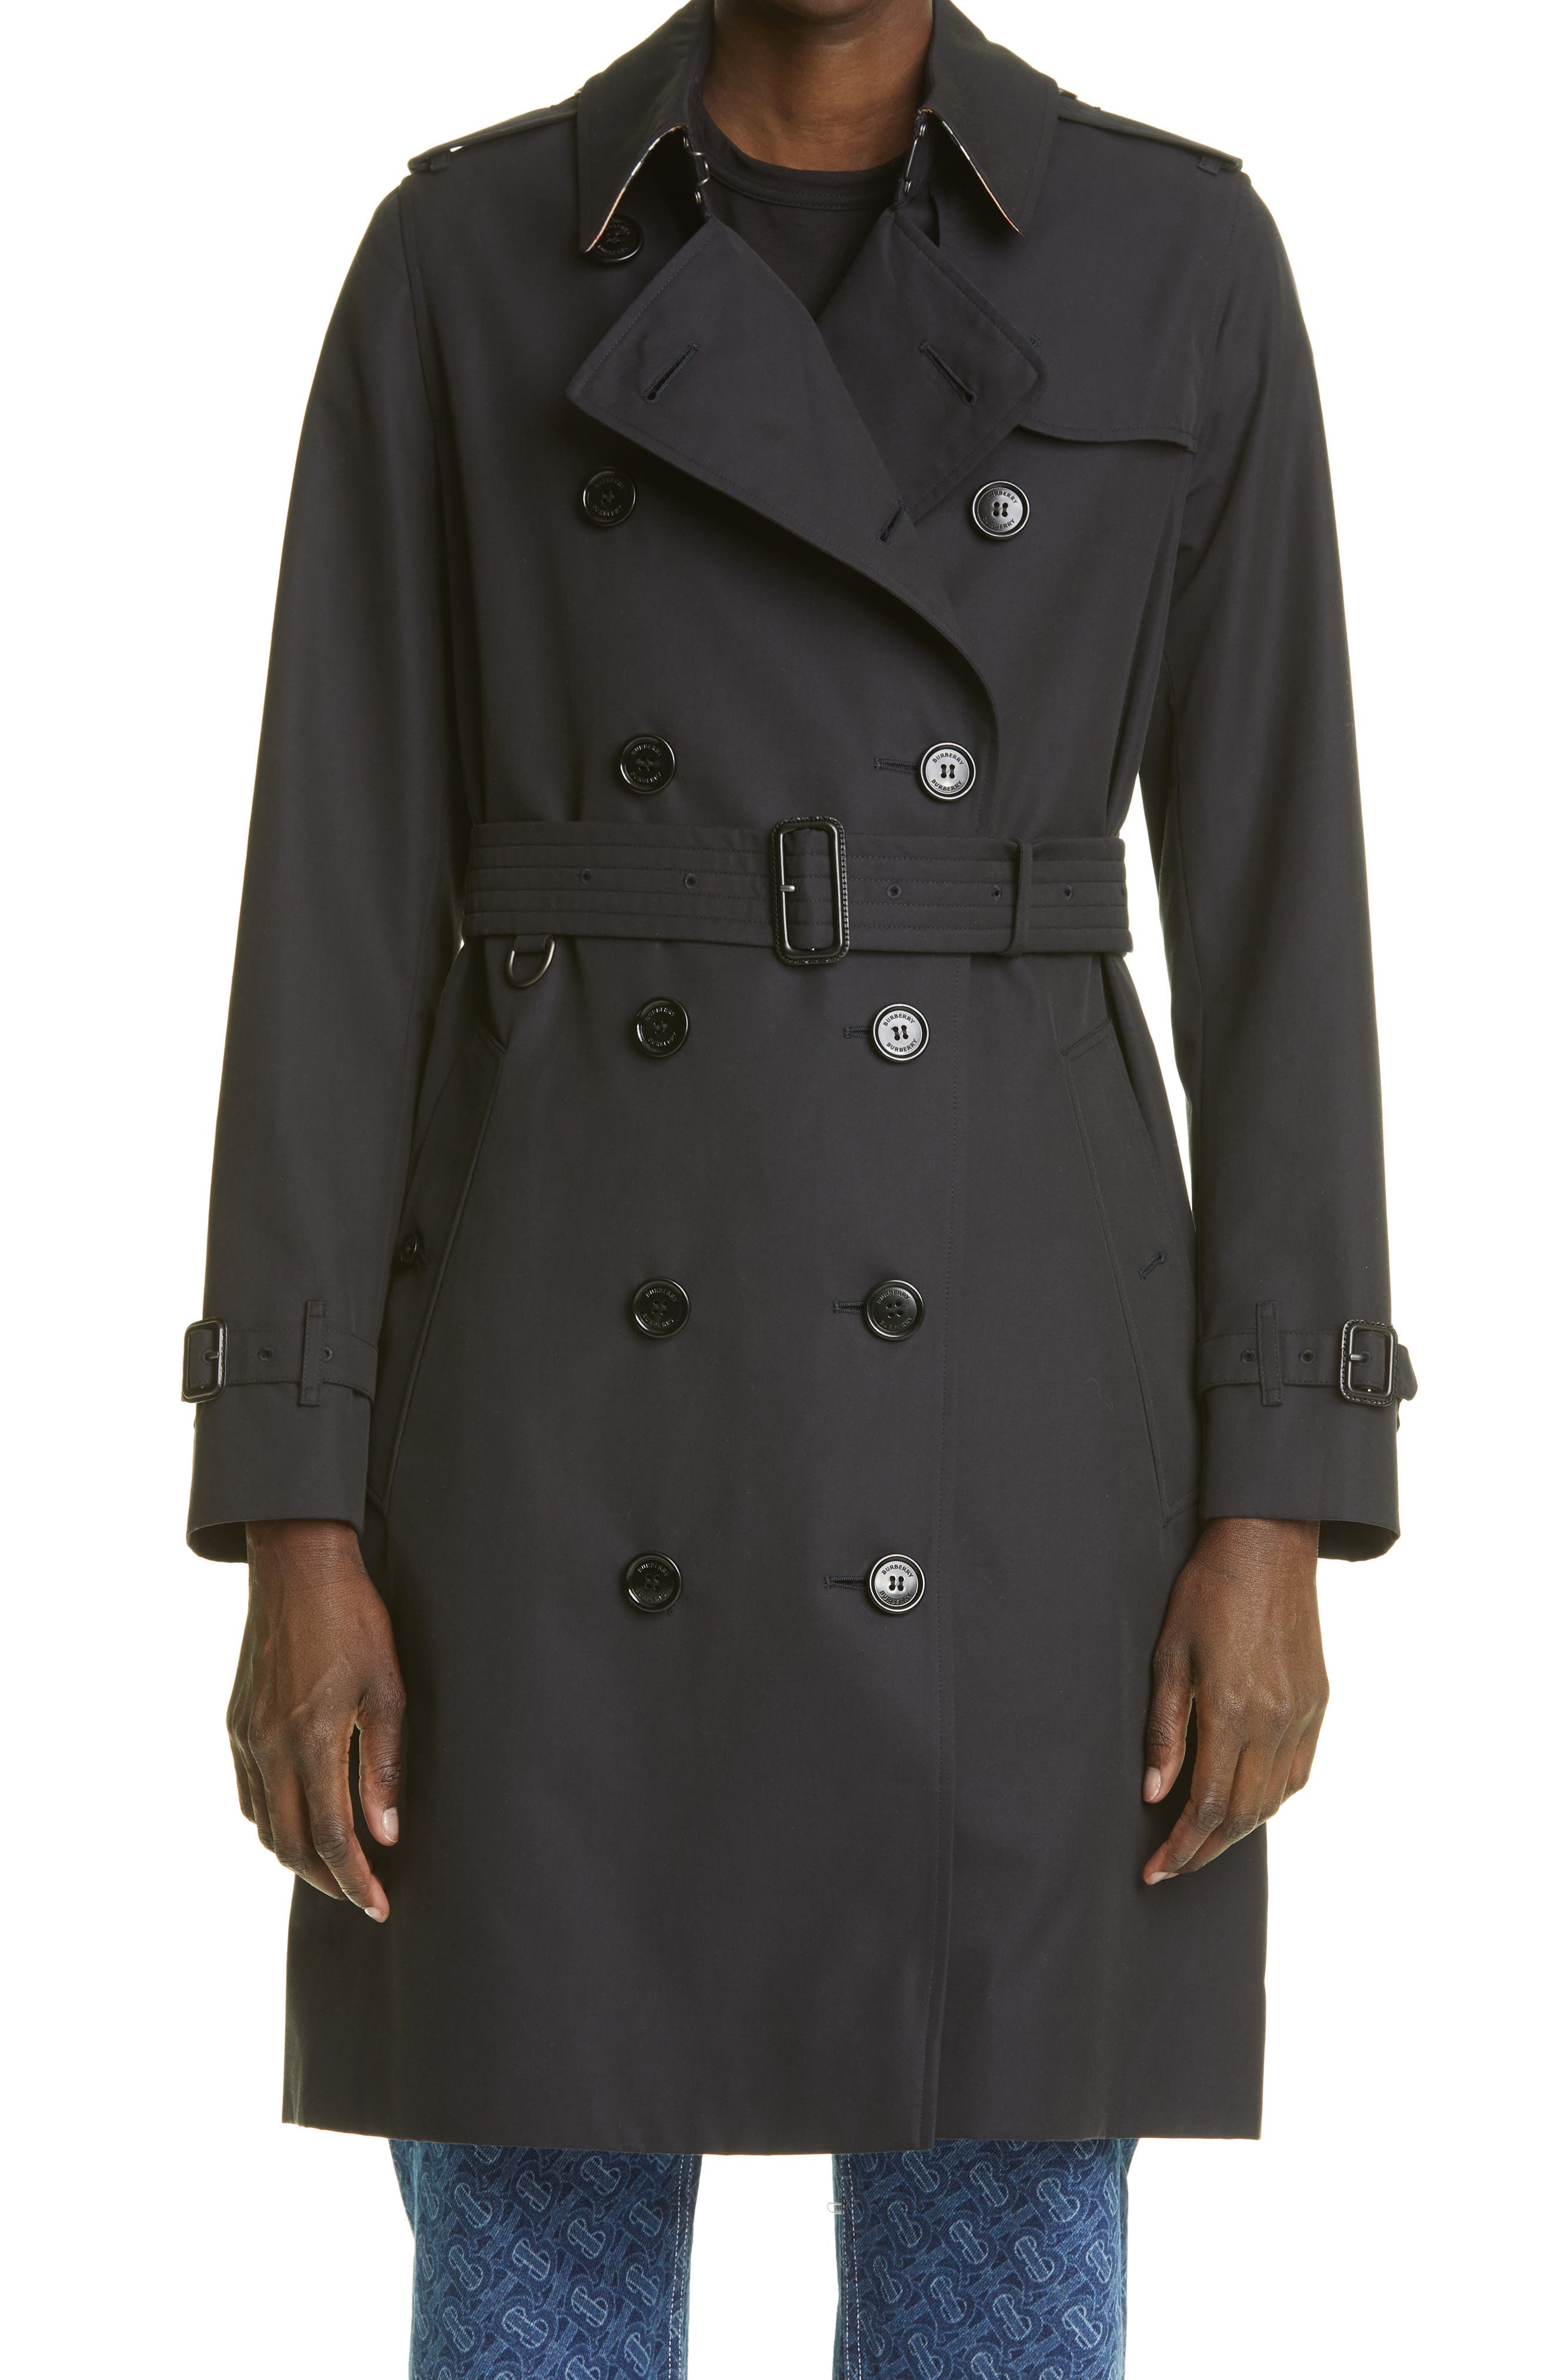 Burberry Cotton The Mid-length Kensington Trench Coat in Midnight for Men Mens Clothing Coats Raincoats and trench coats Black 